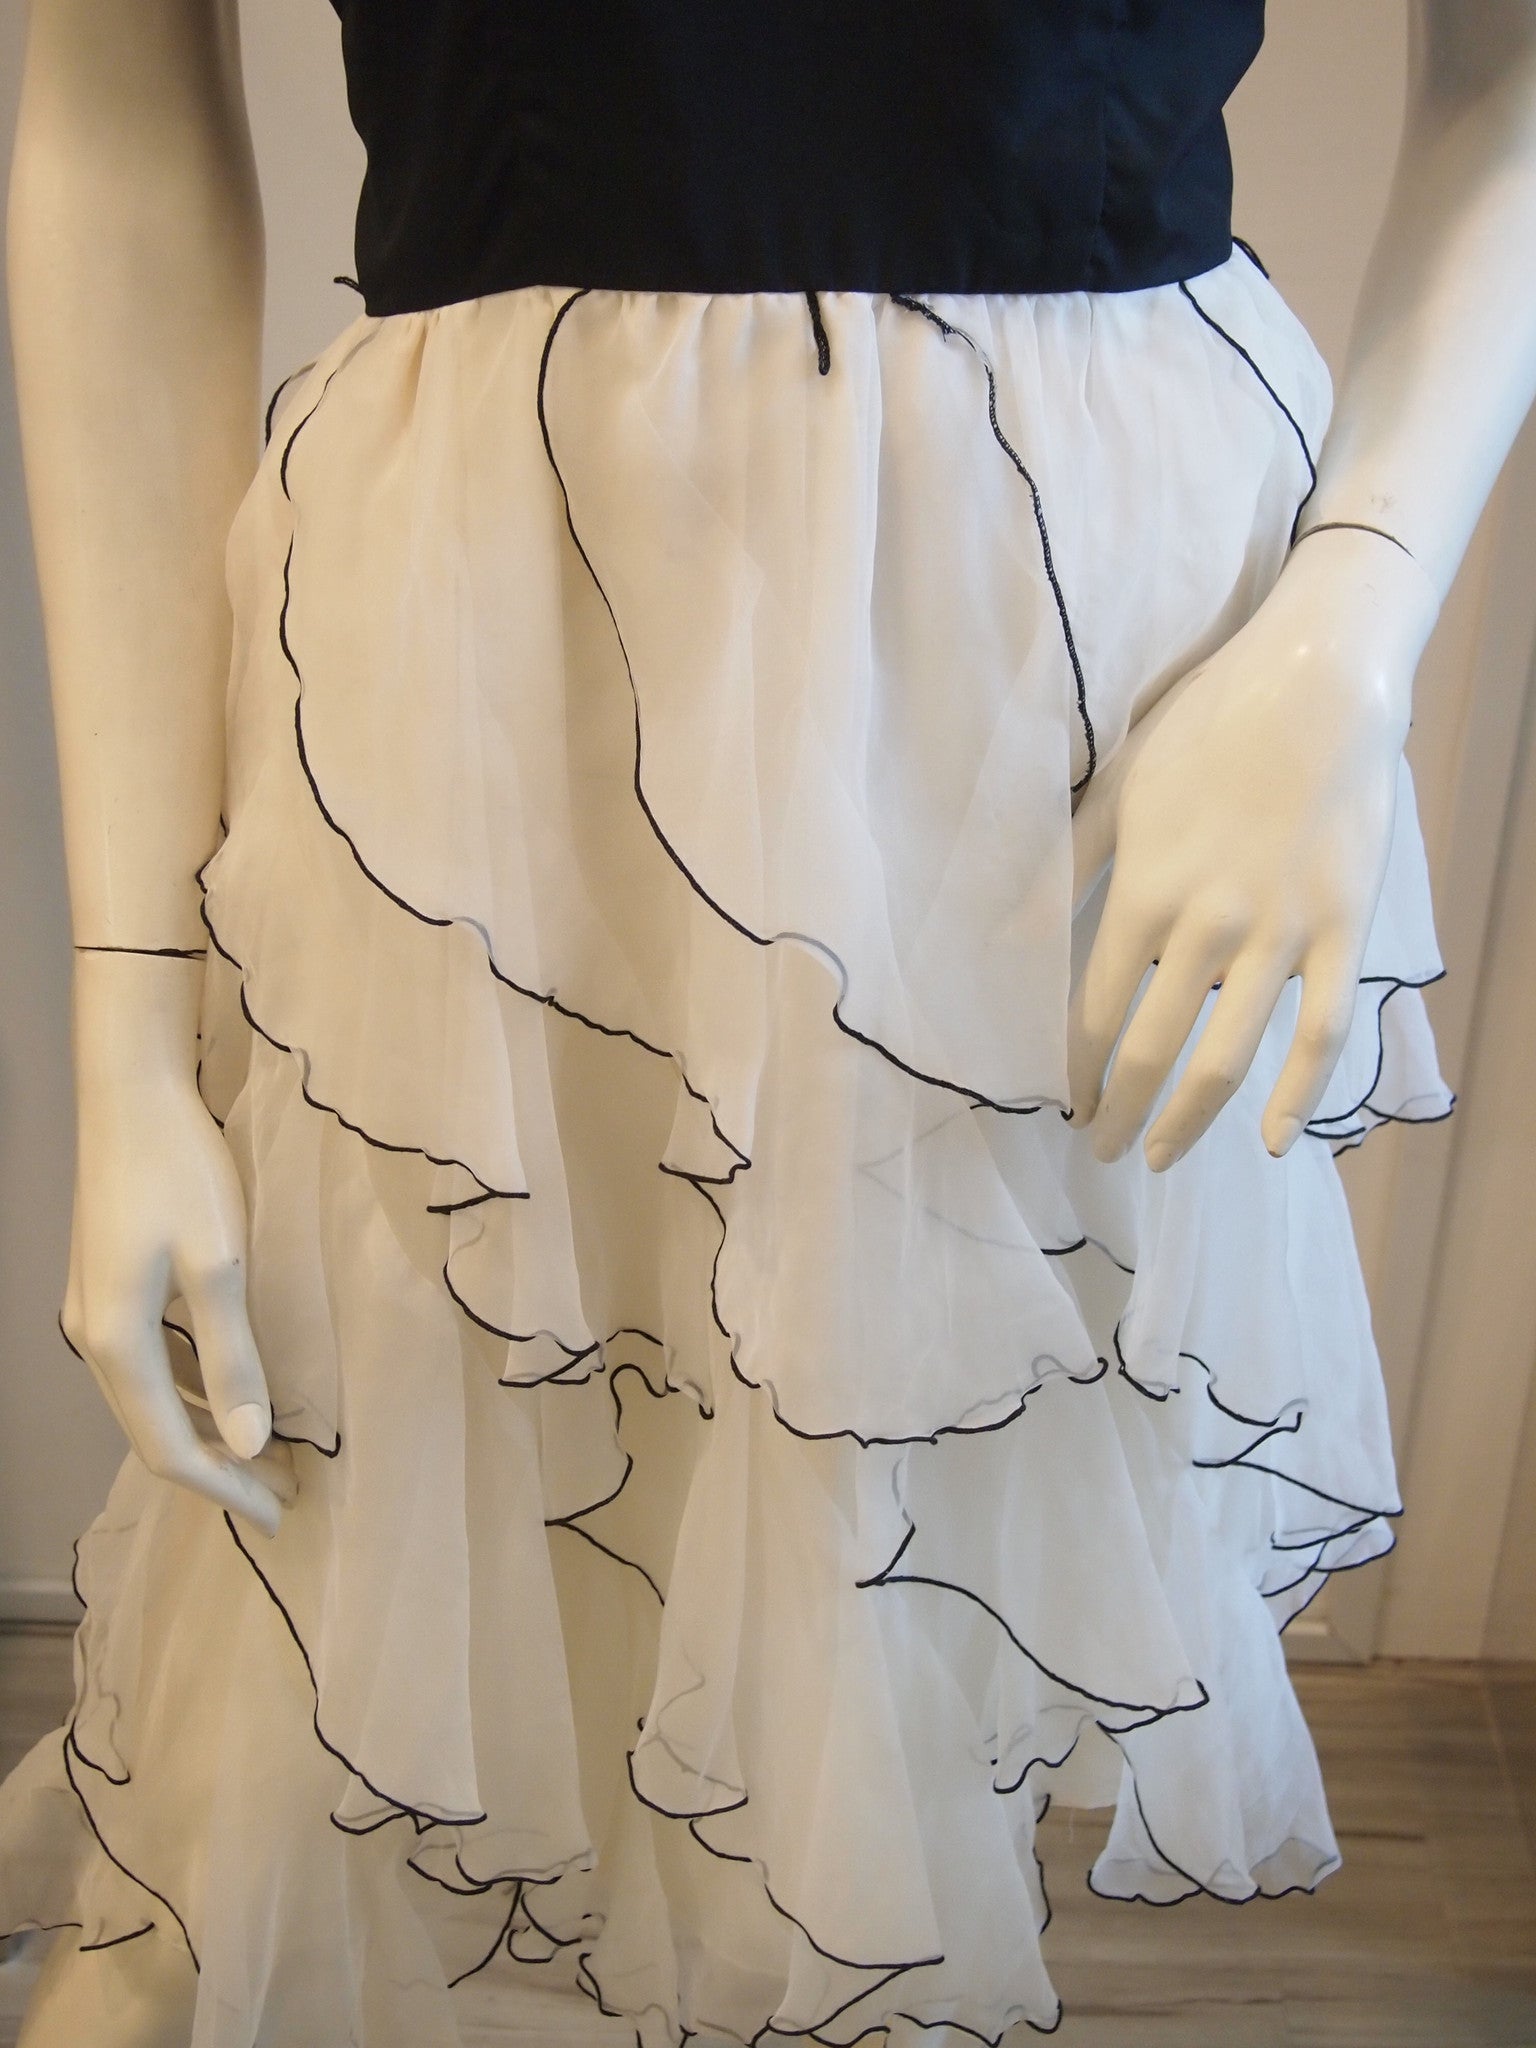 Black with white ruffles and black trimming skirt